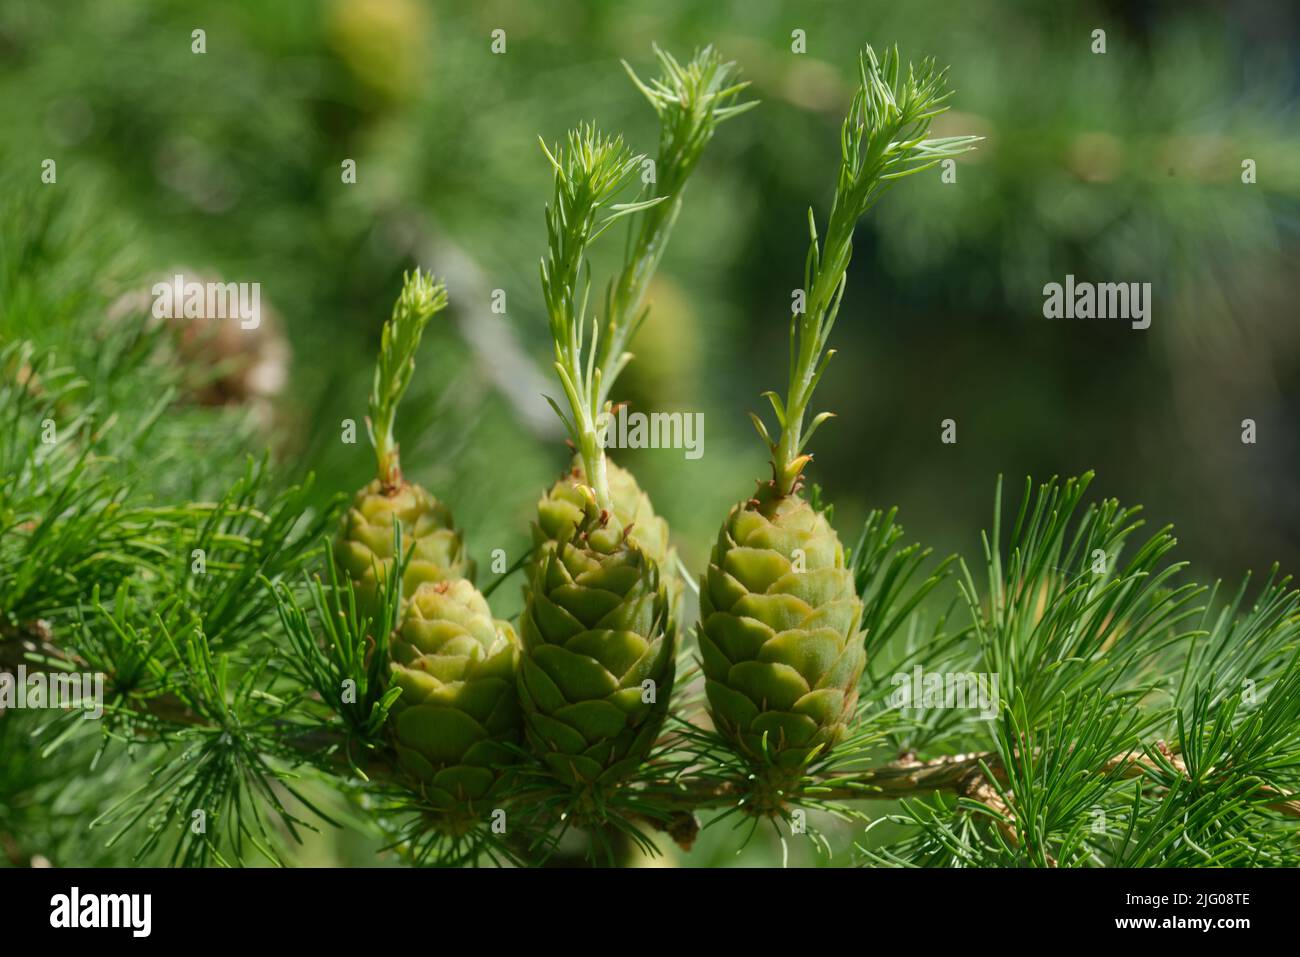 Young ovulate cones  of larch treewith, with shoot outgrowths. Stock Photo